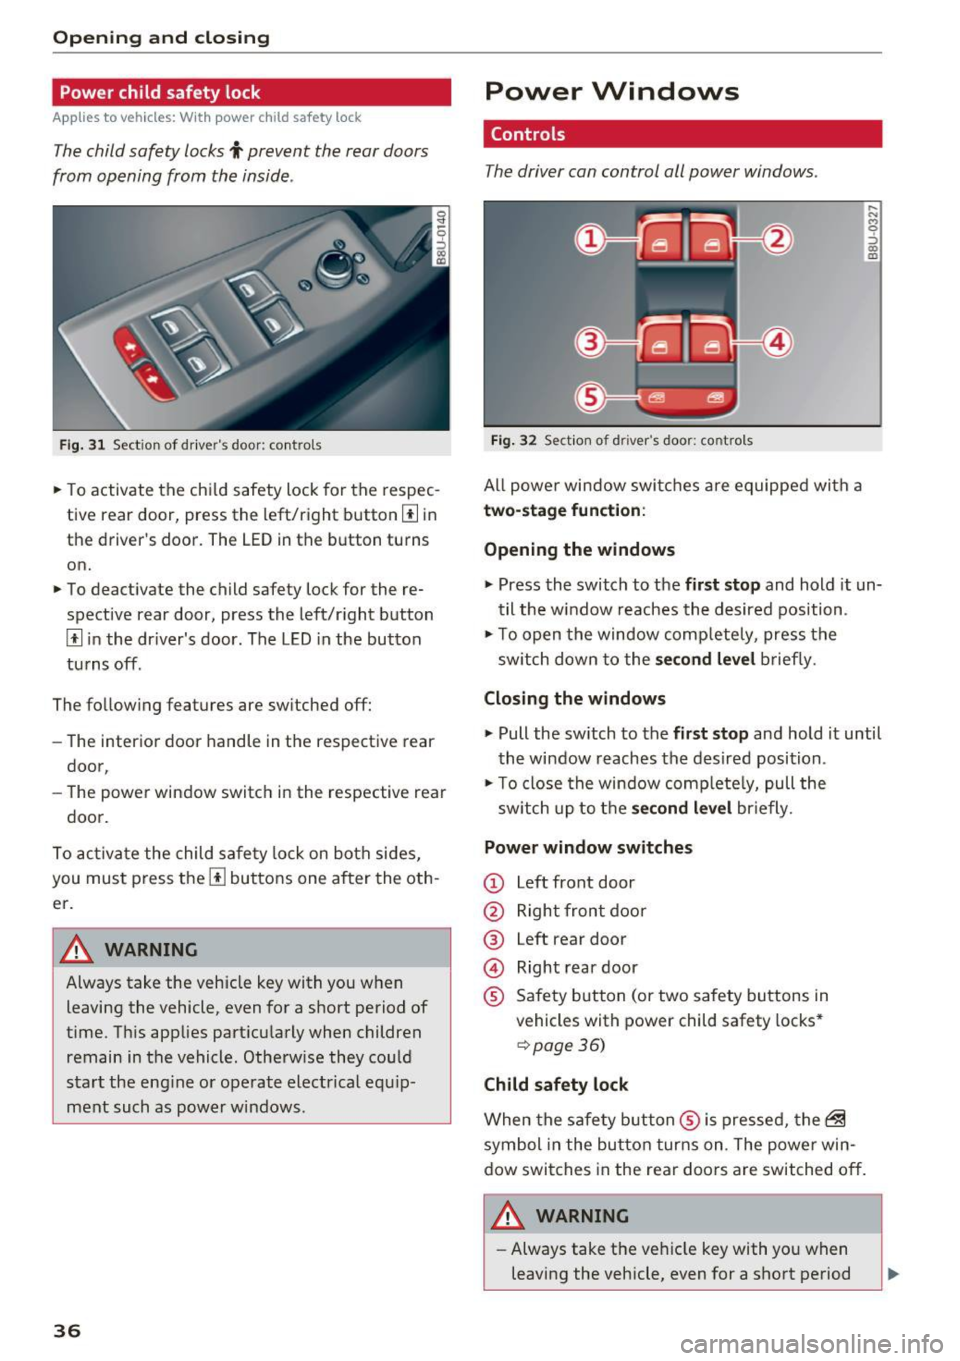 AUDI Q3 2016  Owners Manual Opening  and clo sin g 
Power  child  safety  lock 
Applies  to  veh icles: W it h  power c hild  safety  lock 
The  child  safety  locks t prevent  the  rear  doors 
from  opening  from  the  inside 